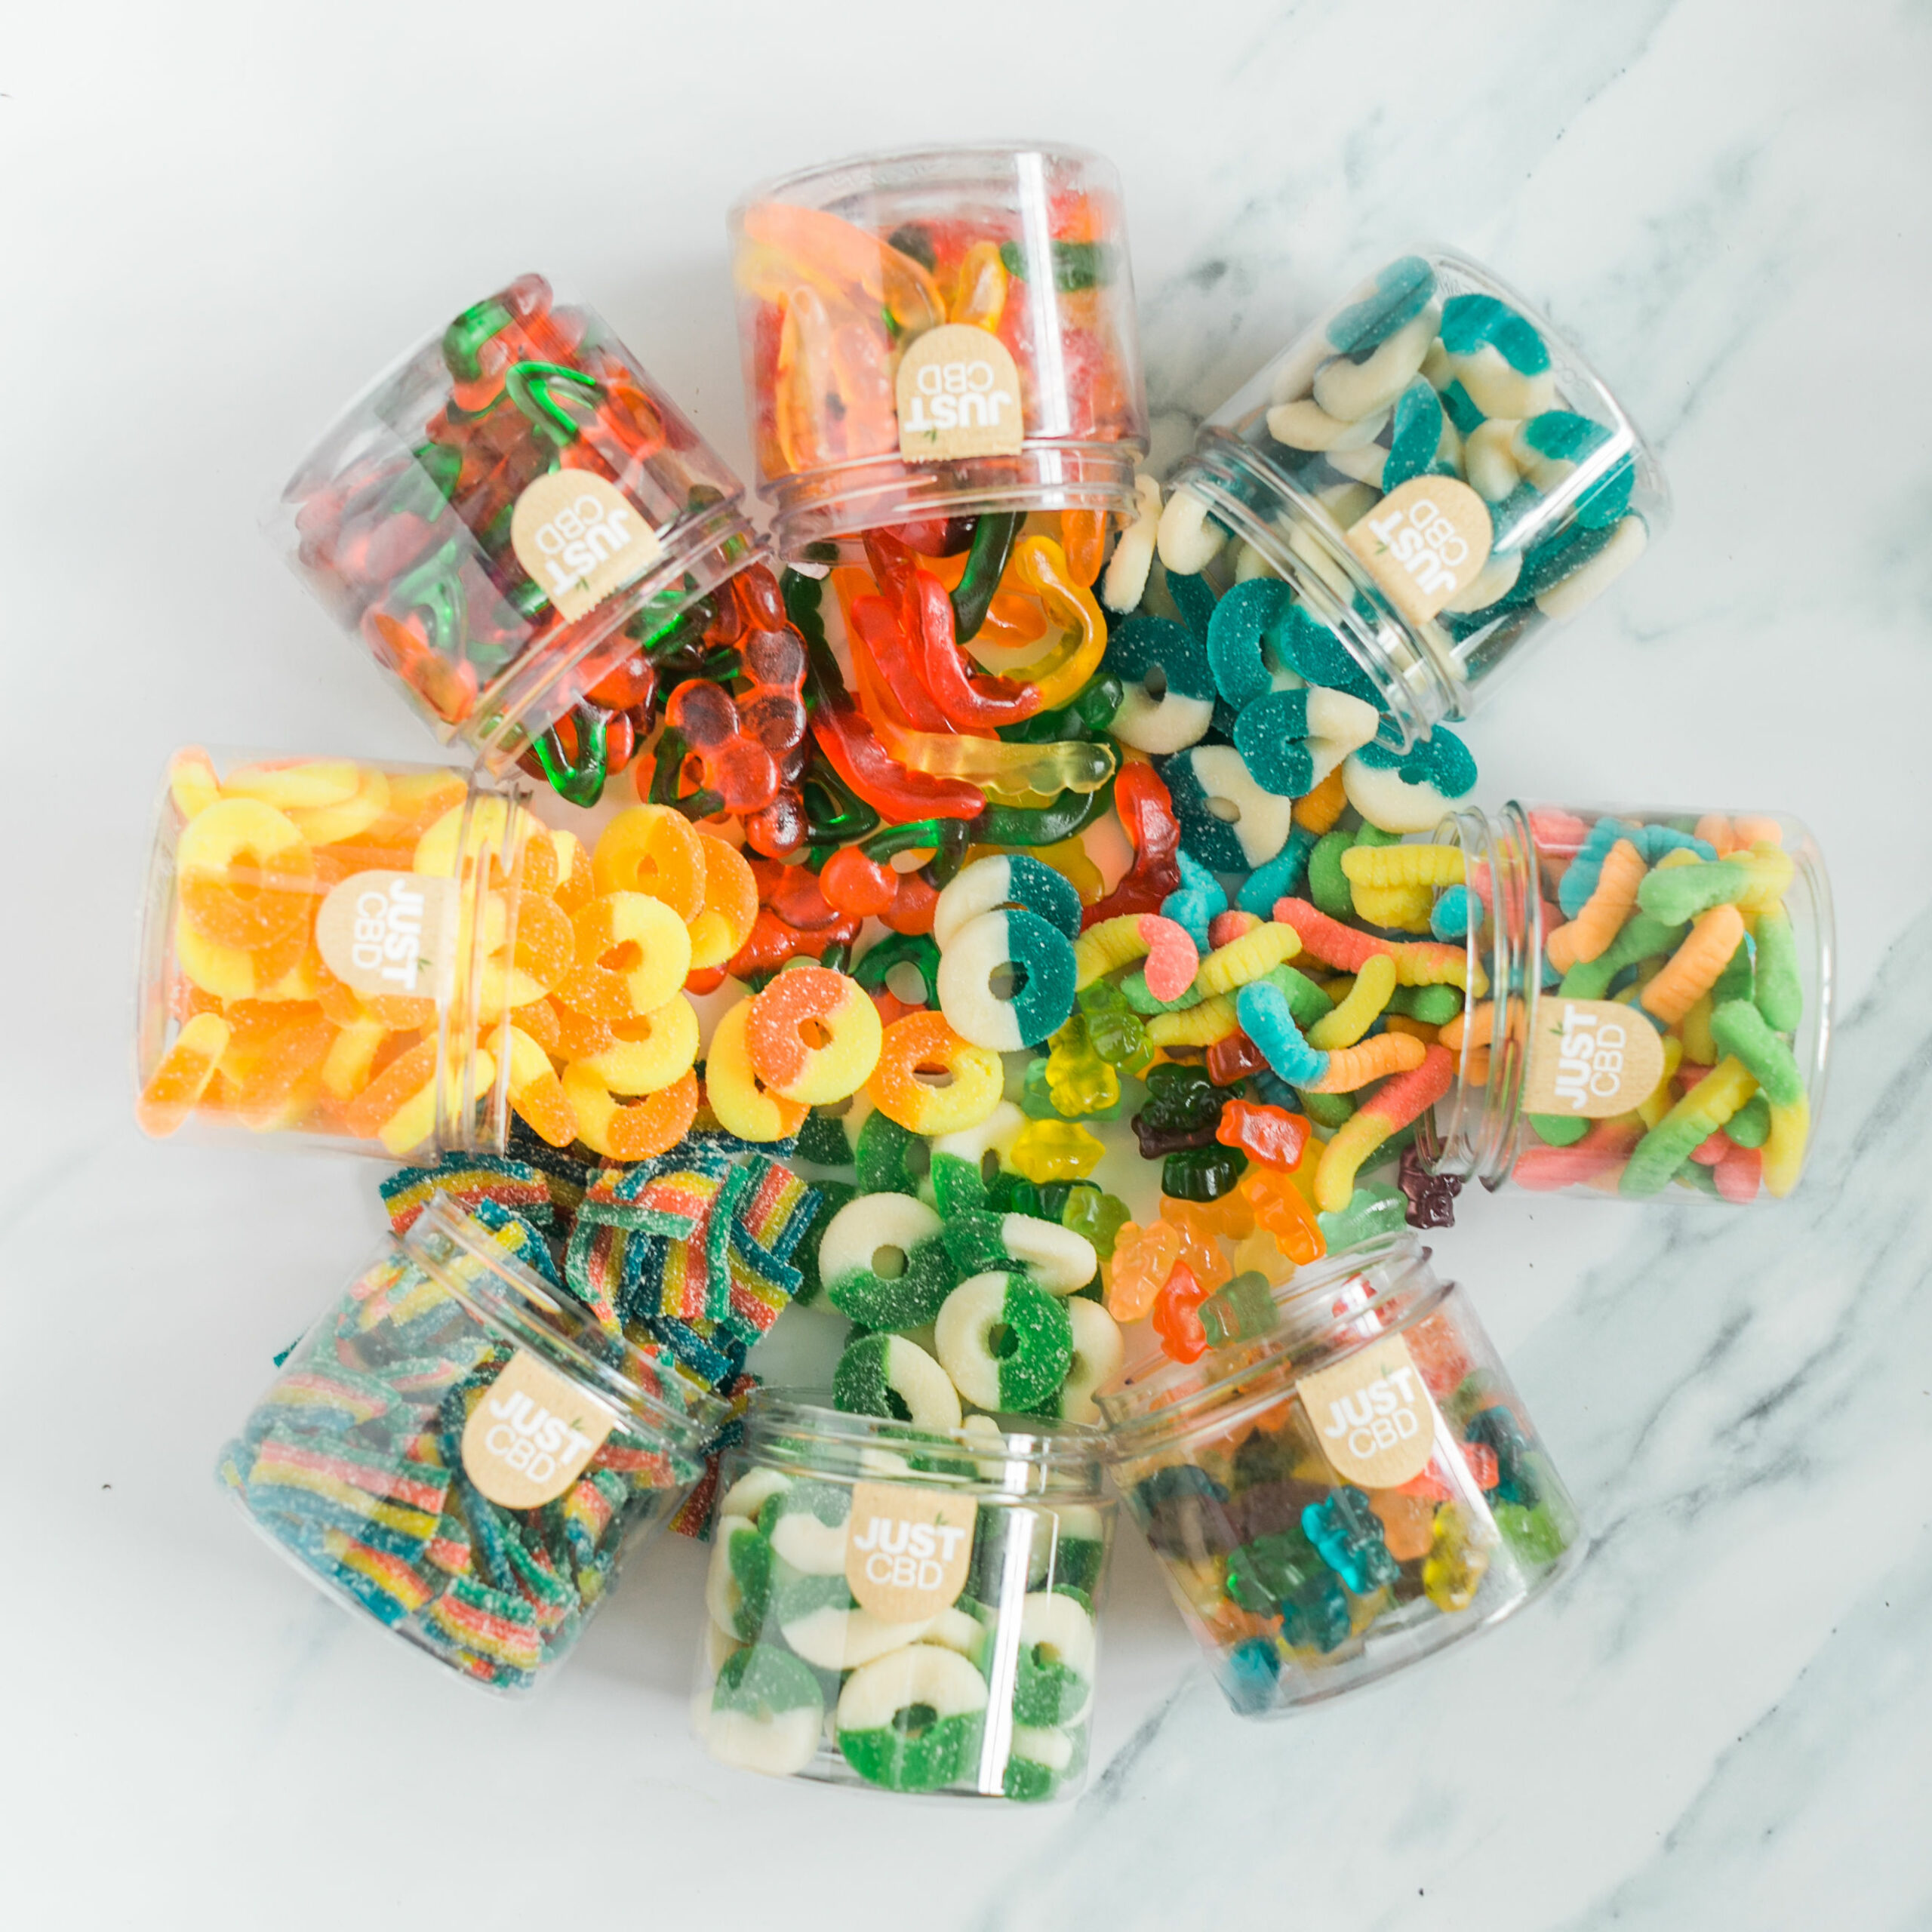 WHY OUR CBD GUMMIES ARE SO POPULAR